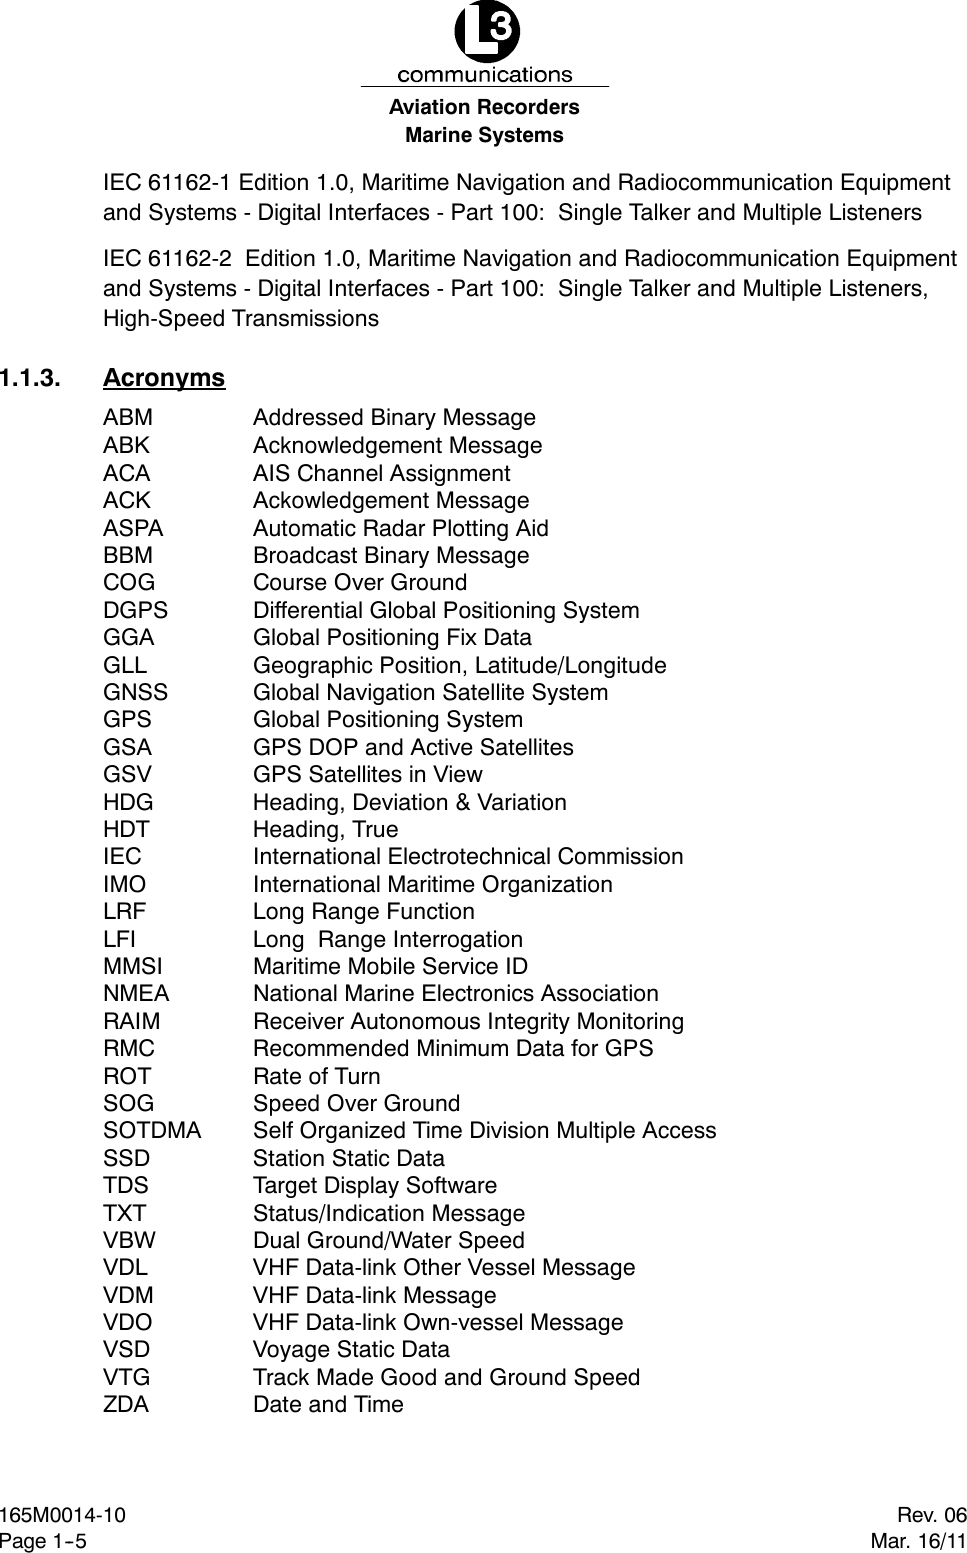 Marine SystemsAviation RecordersRev. 06Mar. 16/11165M0014-10Page 1--5IEC 61162-1 Edition 1.0, Maritime Navigation and Radiocommunication Equipmentand Systems - Digital Interfaces - Part 100: Single Talker and Multiple ListenersIEC 61162-2 Edition 1.0, Maritime Navigation and Radiocommunication Equipmentand Systems - Digital Interfaces - Part 100: Single Talker and Multiple Listeners,High-Speed Transmissions1.1.3. AcronymsABM Addressed Binary MessageABK Acknowledgement MessageACA AIS Channel AssignmentACK Ackowledgement MessageASPA Automatic Radar Plotting AidBBM Broadcast Binary MessageCOG Course Over GroundDGPS Differential Global Positioning SystemGGA Global Positioning Fix DataGLL Geographic Position, Latitude/LongitudeGNSS Global Navigation Satellite SystemGPS Global Positioning SystemGSA GPS DOP and Active SatellitesGSV GPS Satellites in ViewHDG Heading, Deviation &amp; VariationHDT Heading, TrueIEC International Electrotechnical CommissionIMO International Maritime OrganizationLRF Long Range FunctionLFI Long Range InterrogationMMSI Maritime Mobile Service IDNMEA National Marine Electronics AssociationRAIM Receiver Autonomous Integrity MonitoringRMC Recommended Minimum Data for GPSROT Rate of TurnSOG Speed Over GroundSOTDMA Self Organized Time Division Multiple AccessSSD Station Static DataTDS Target Display SoftwareTXT Status/Indication MessageVBW Dual Ground/Water SpeedVDL VHF Data-link Other Vessel MessageVDM VHF Data-link MessageVDO VHF Data-link Own-vessel MessageVSD Voyage Static DataVTG Track Made Good and Ground SpeedZDA Date and Time